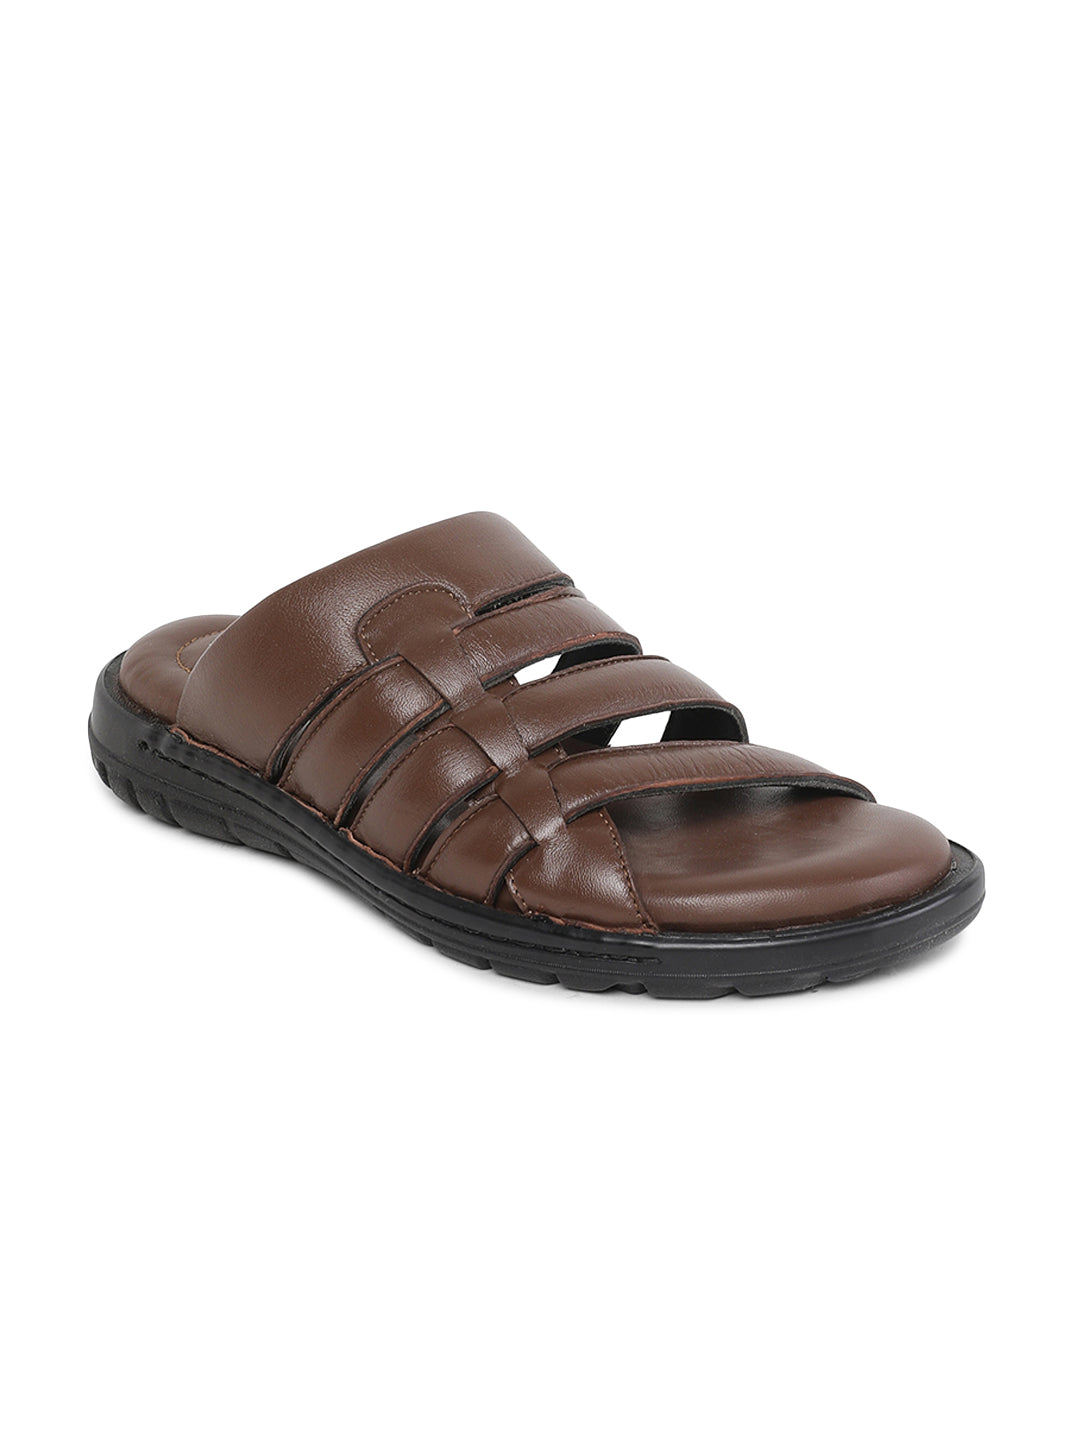 Paragon  R10309G Men Stylish Sandals | Comfortable Sandals for Daily Outdoor Use | Casual Formal Sandals with Cushioned Soles